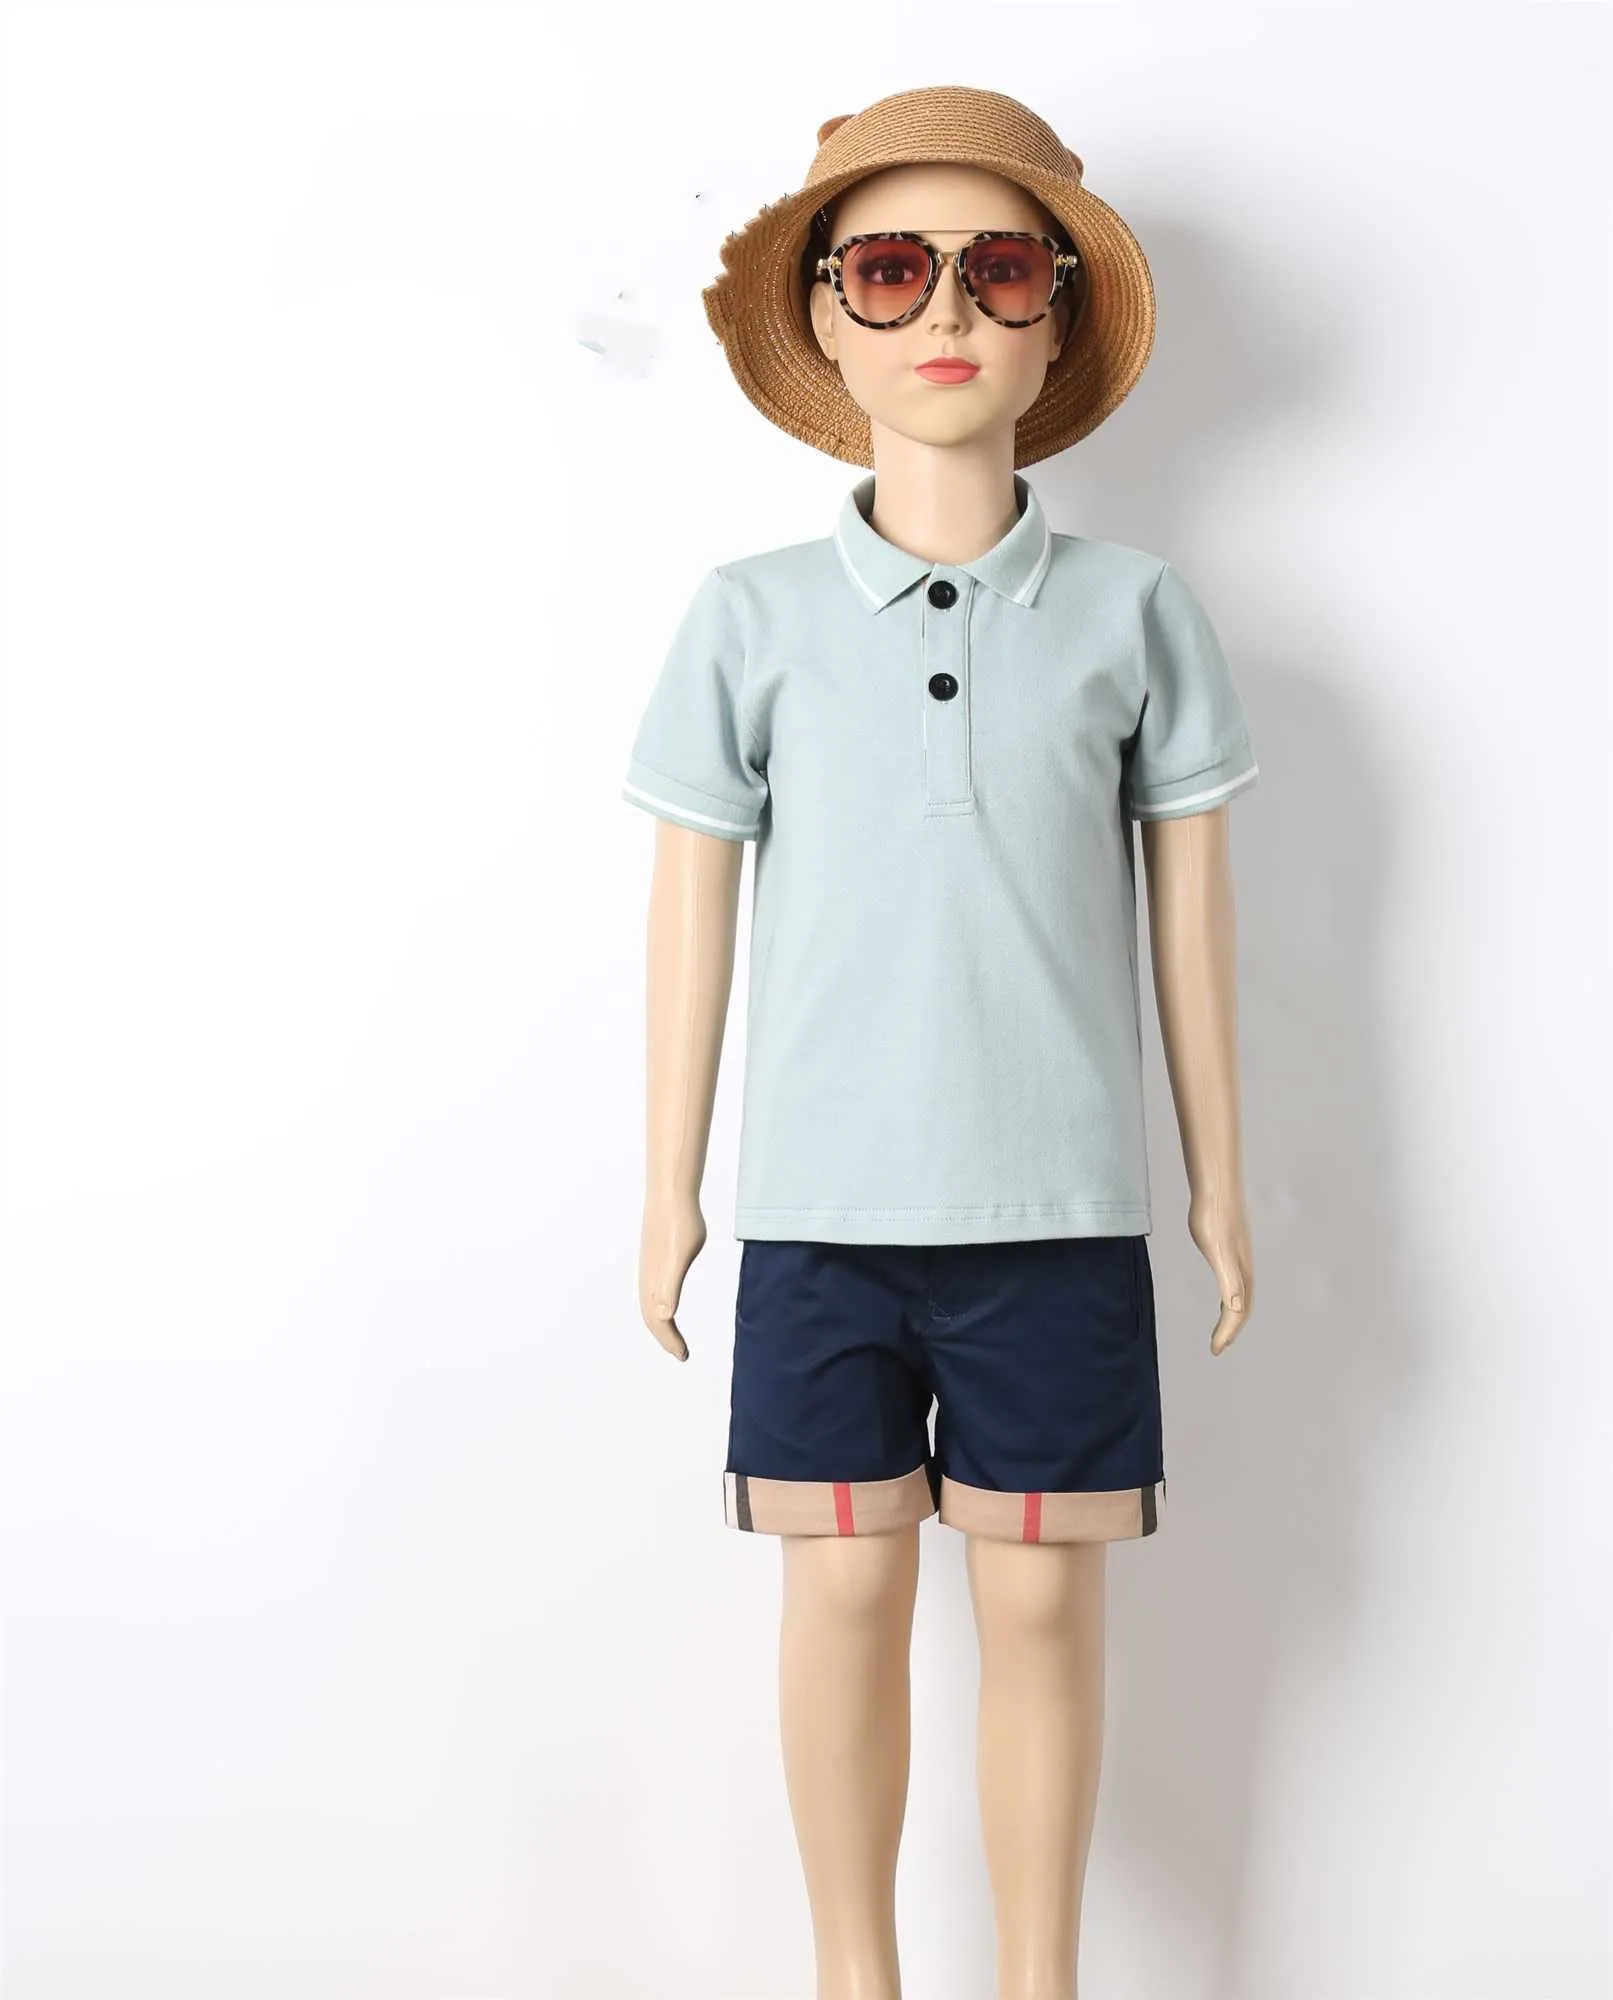 Clothing Sets 2023 Summer 2 Piece Outfit Baby Boy Set Clothes Casual Fashion Cool Cute Cotton TshirtShorts Boutique Kids Clothing W230210